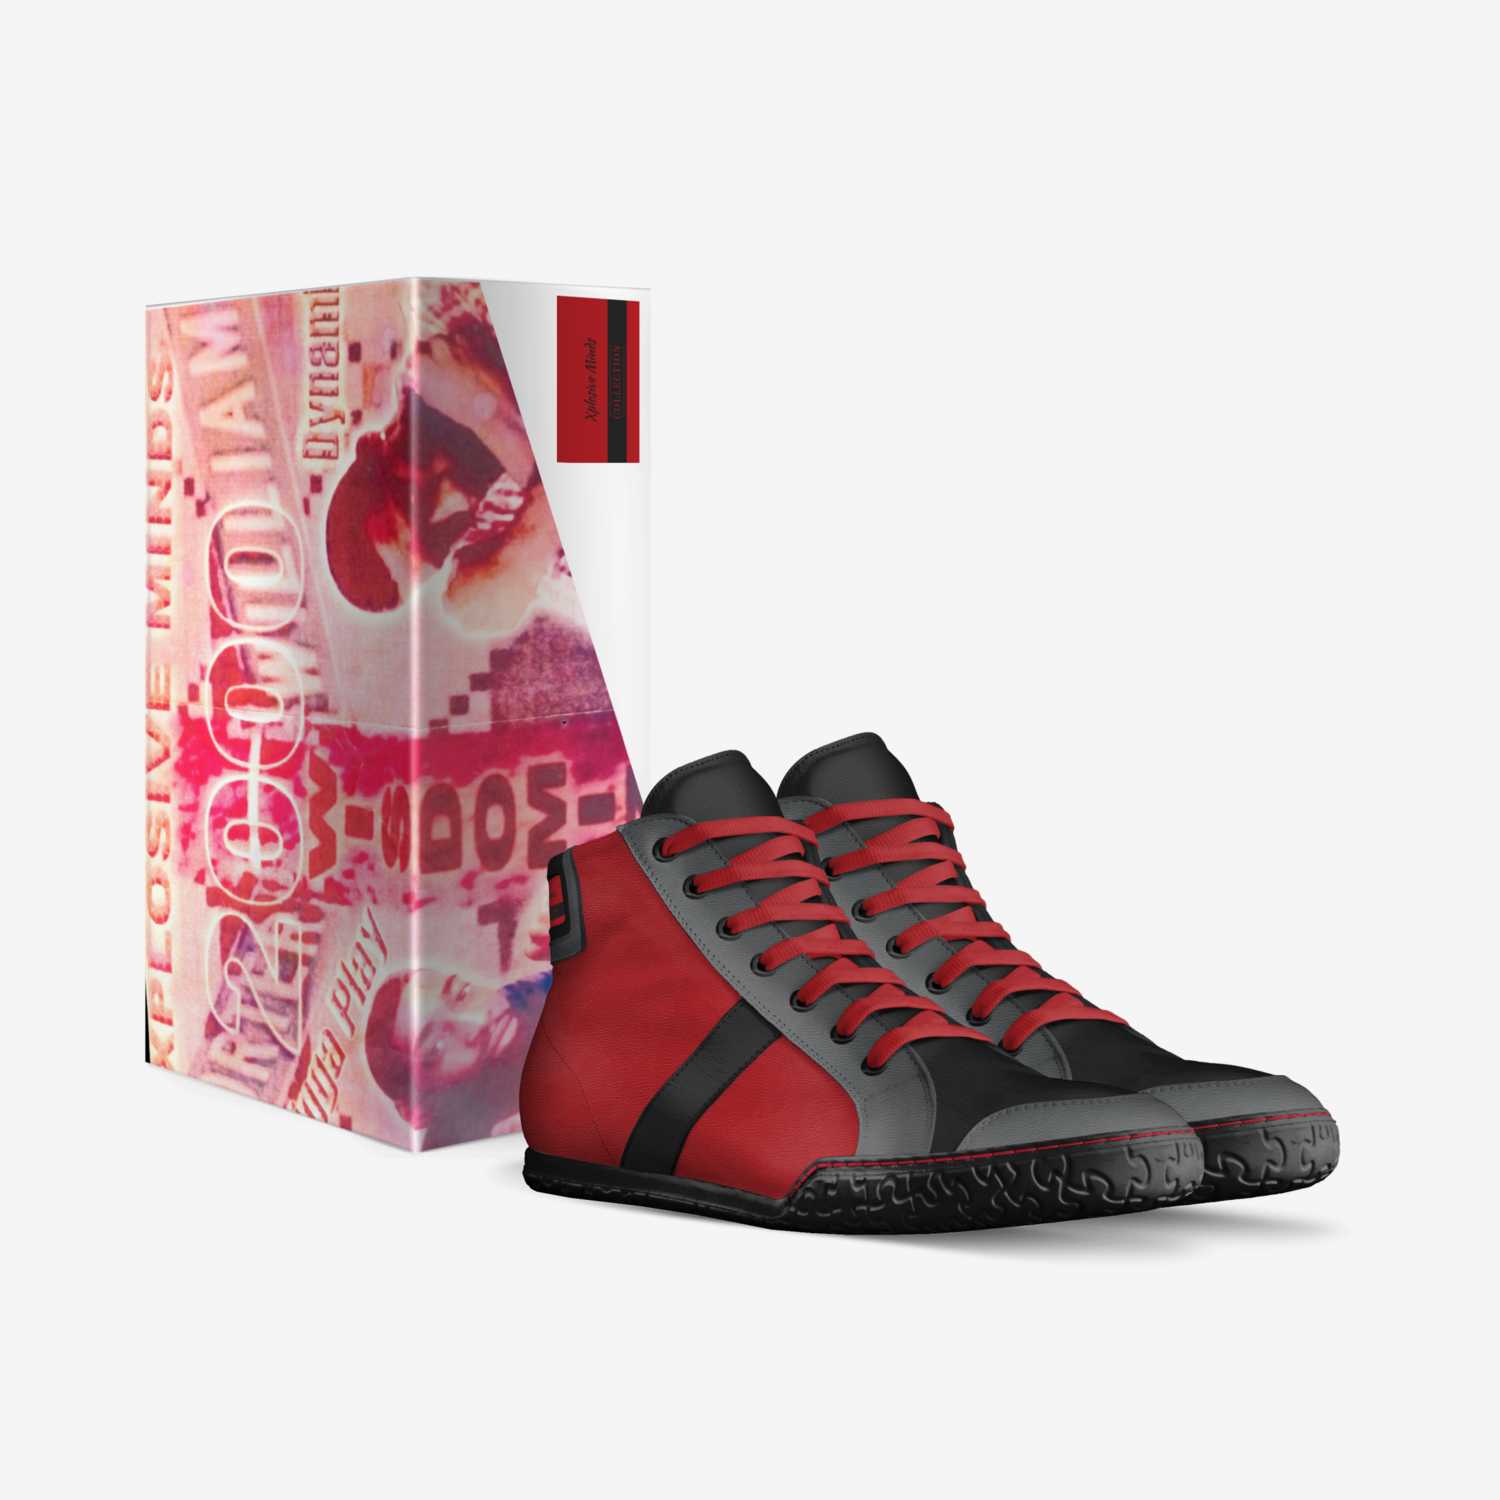 Xplosive Minds custom made in Italy shoes by Carlos Bankston-merriweather | Box view